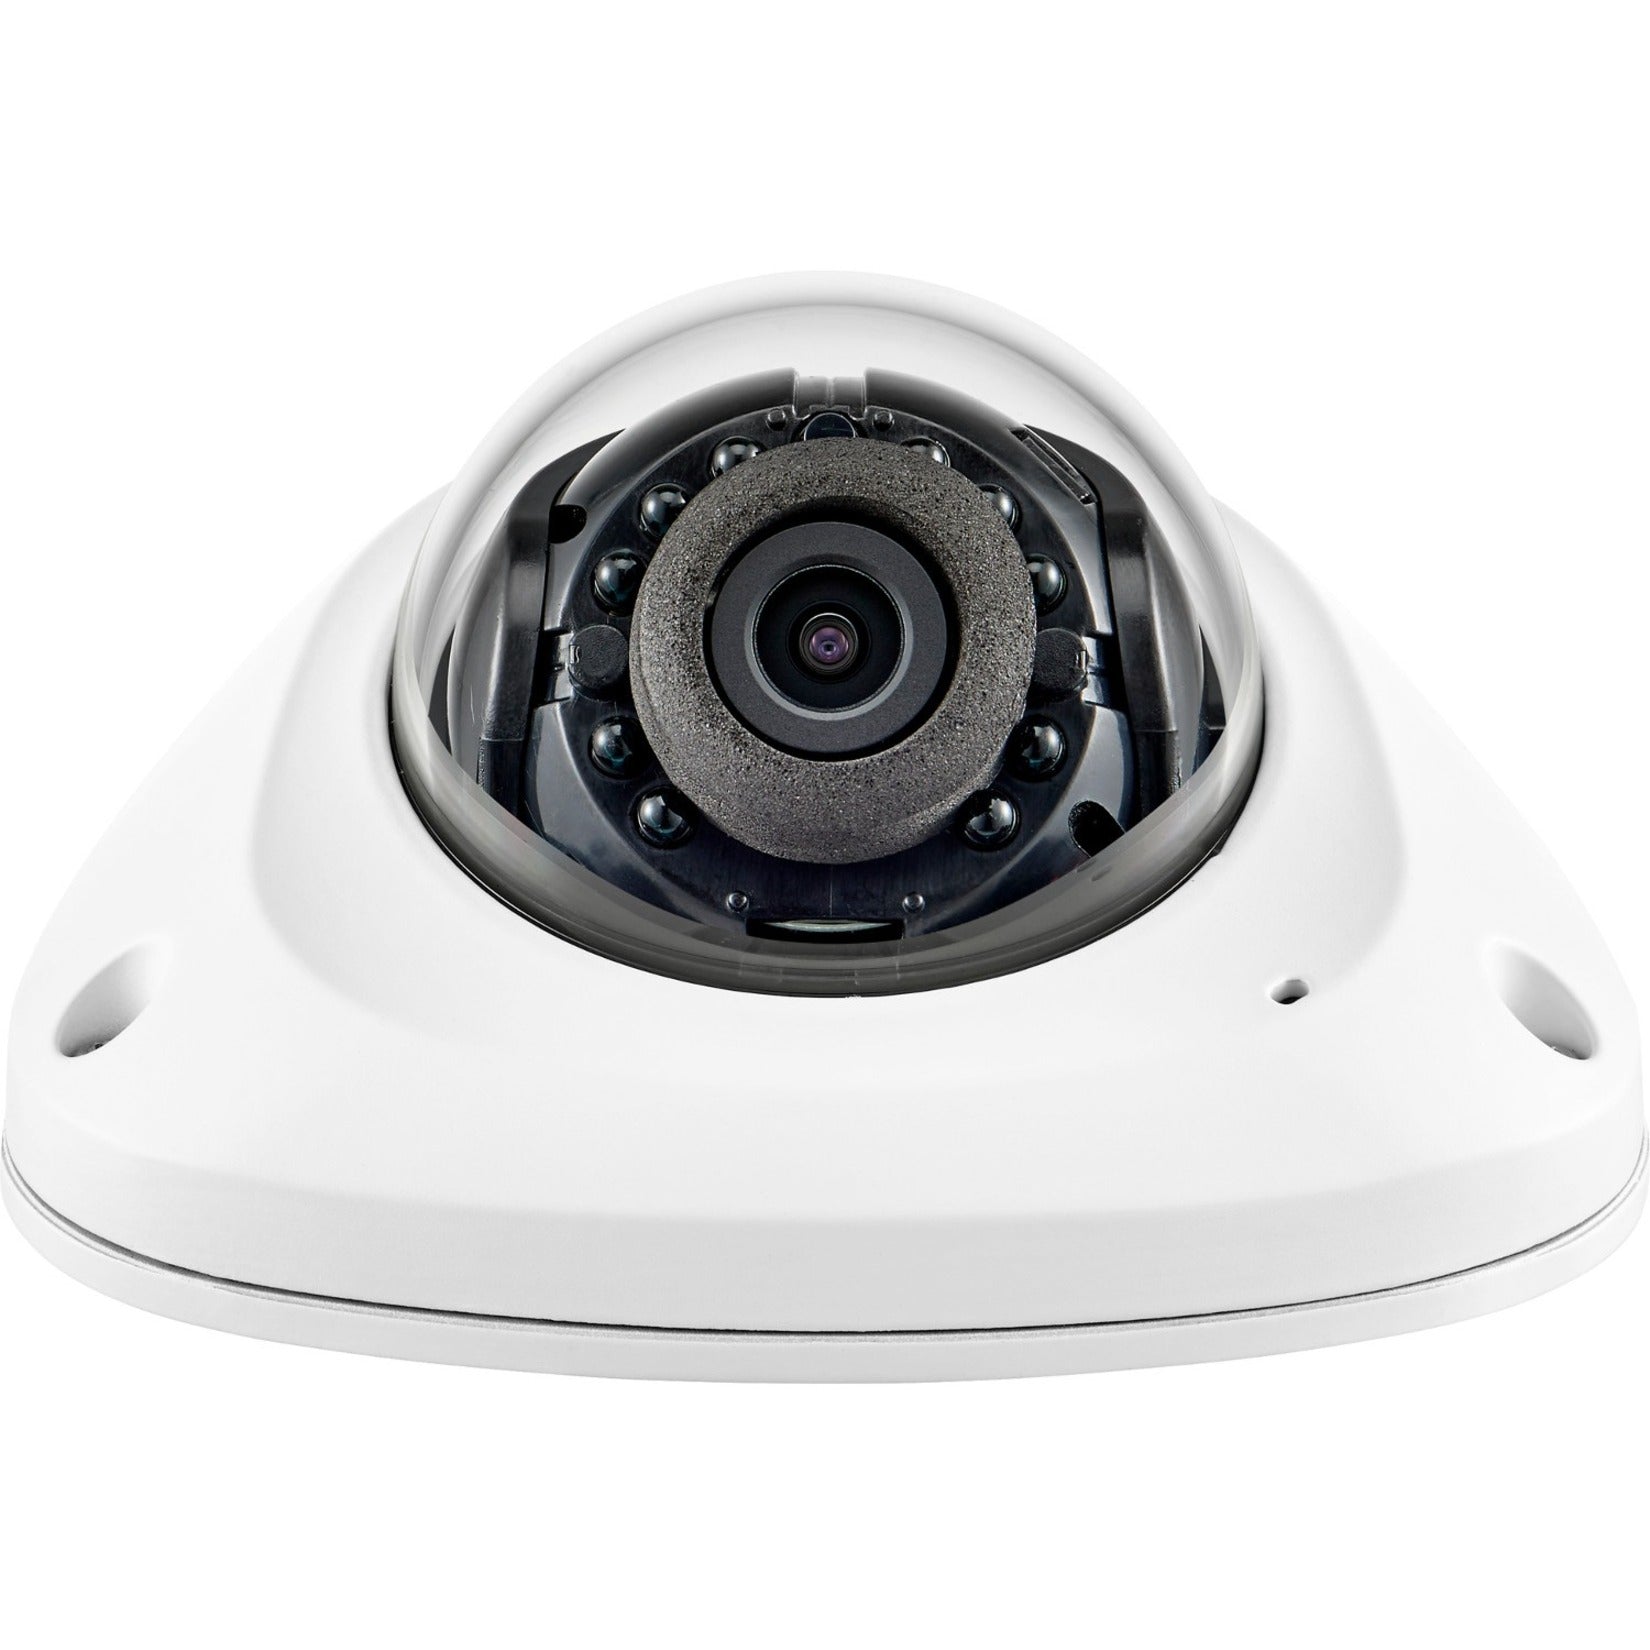 Hanwha Techwin ANV-L6023R 2MP Vandal-Resistant Network IR Flateye Dome, Outdoor Mini Dome Camera, 2MP @ 30 FPS, 3.6mm Fixed Focal Lens